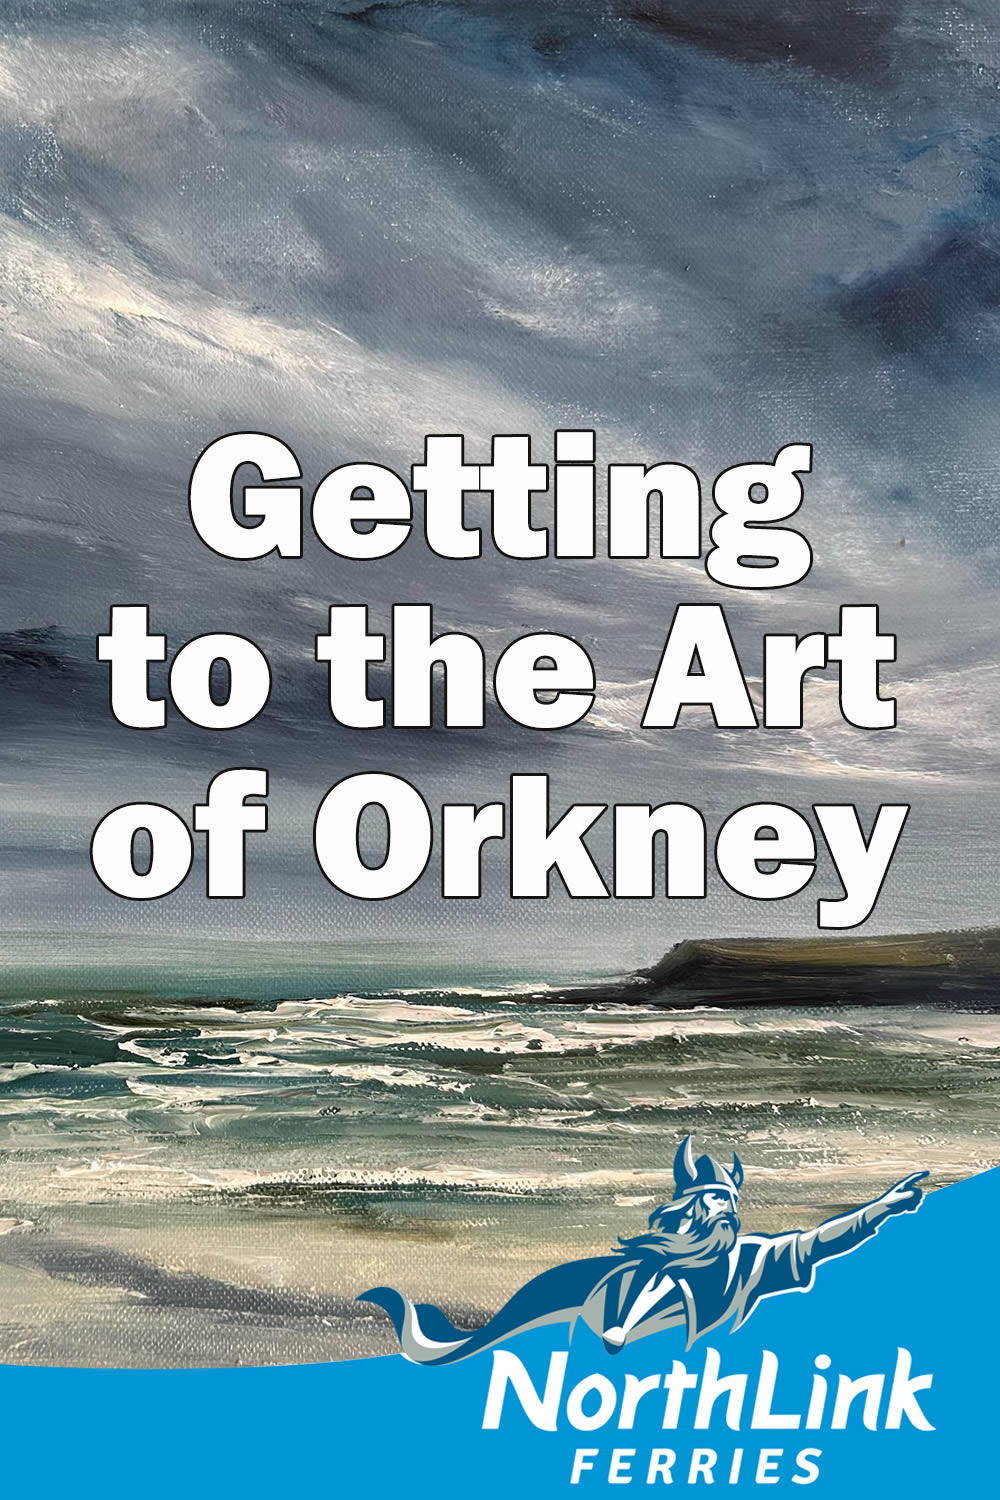 Getting to the art of Orkney